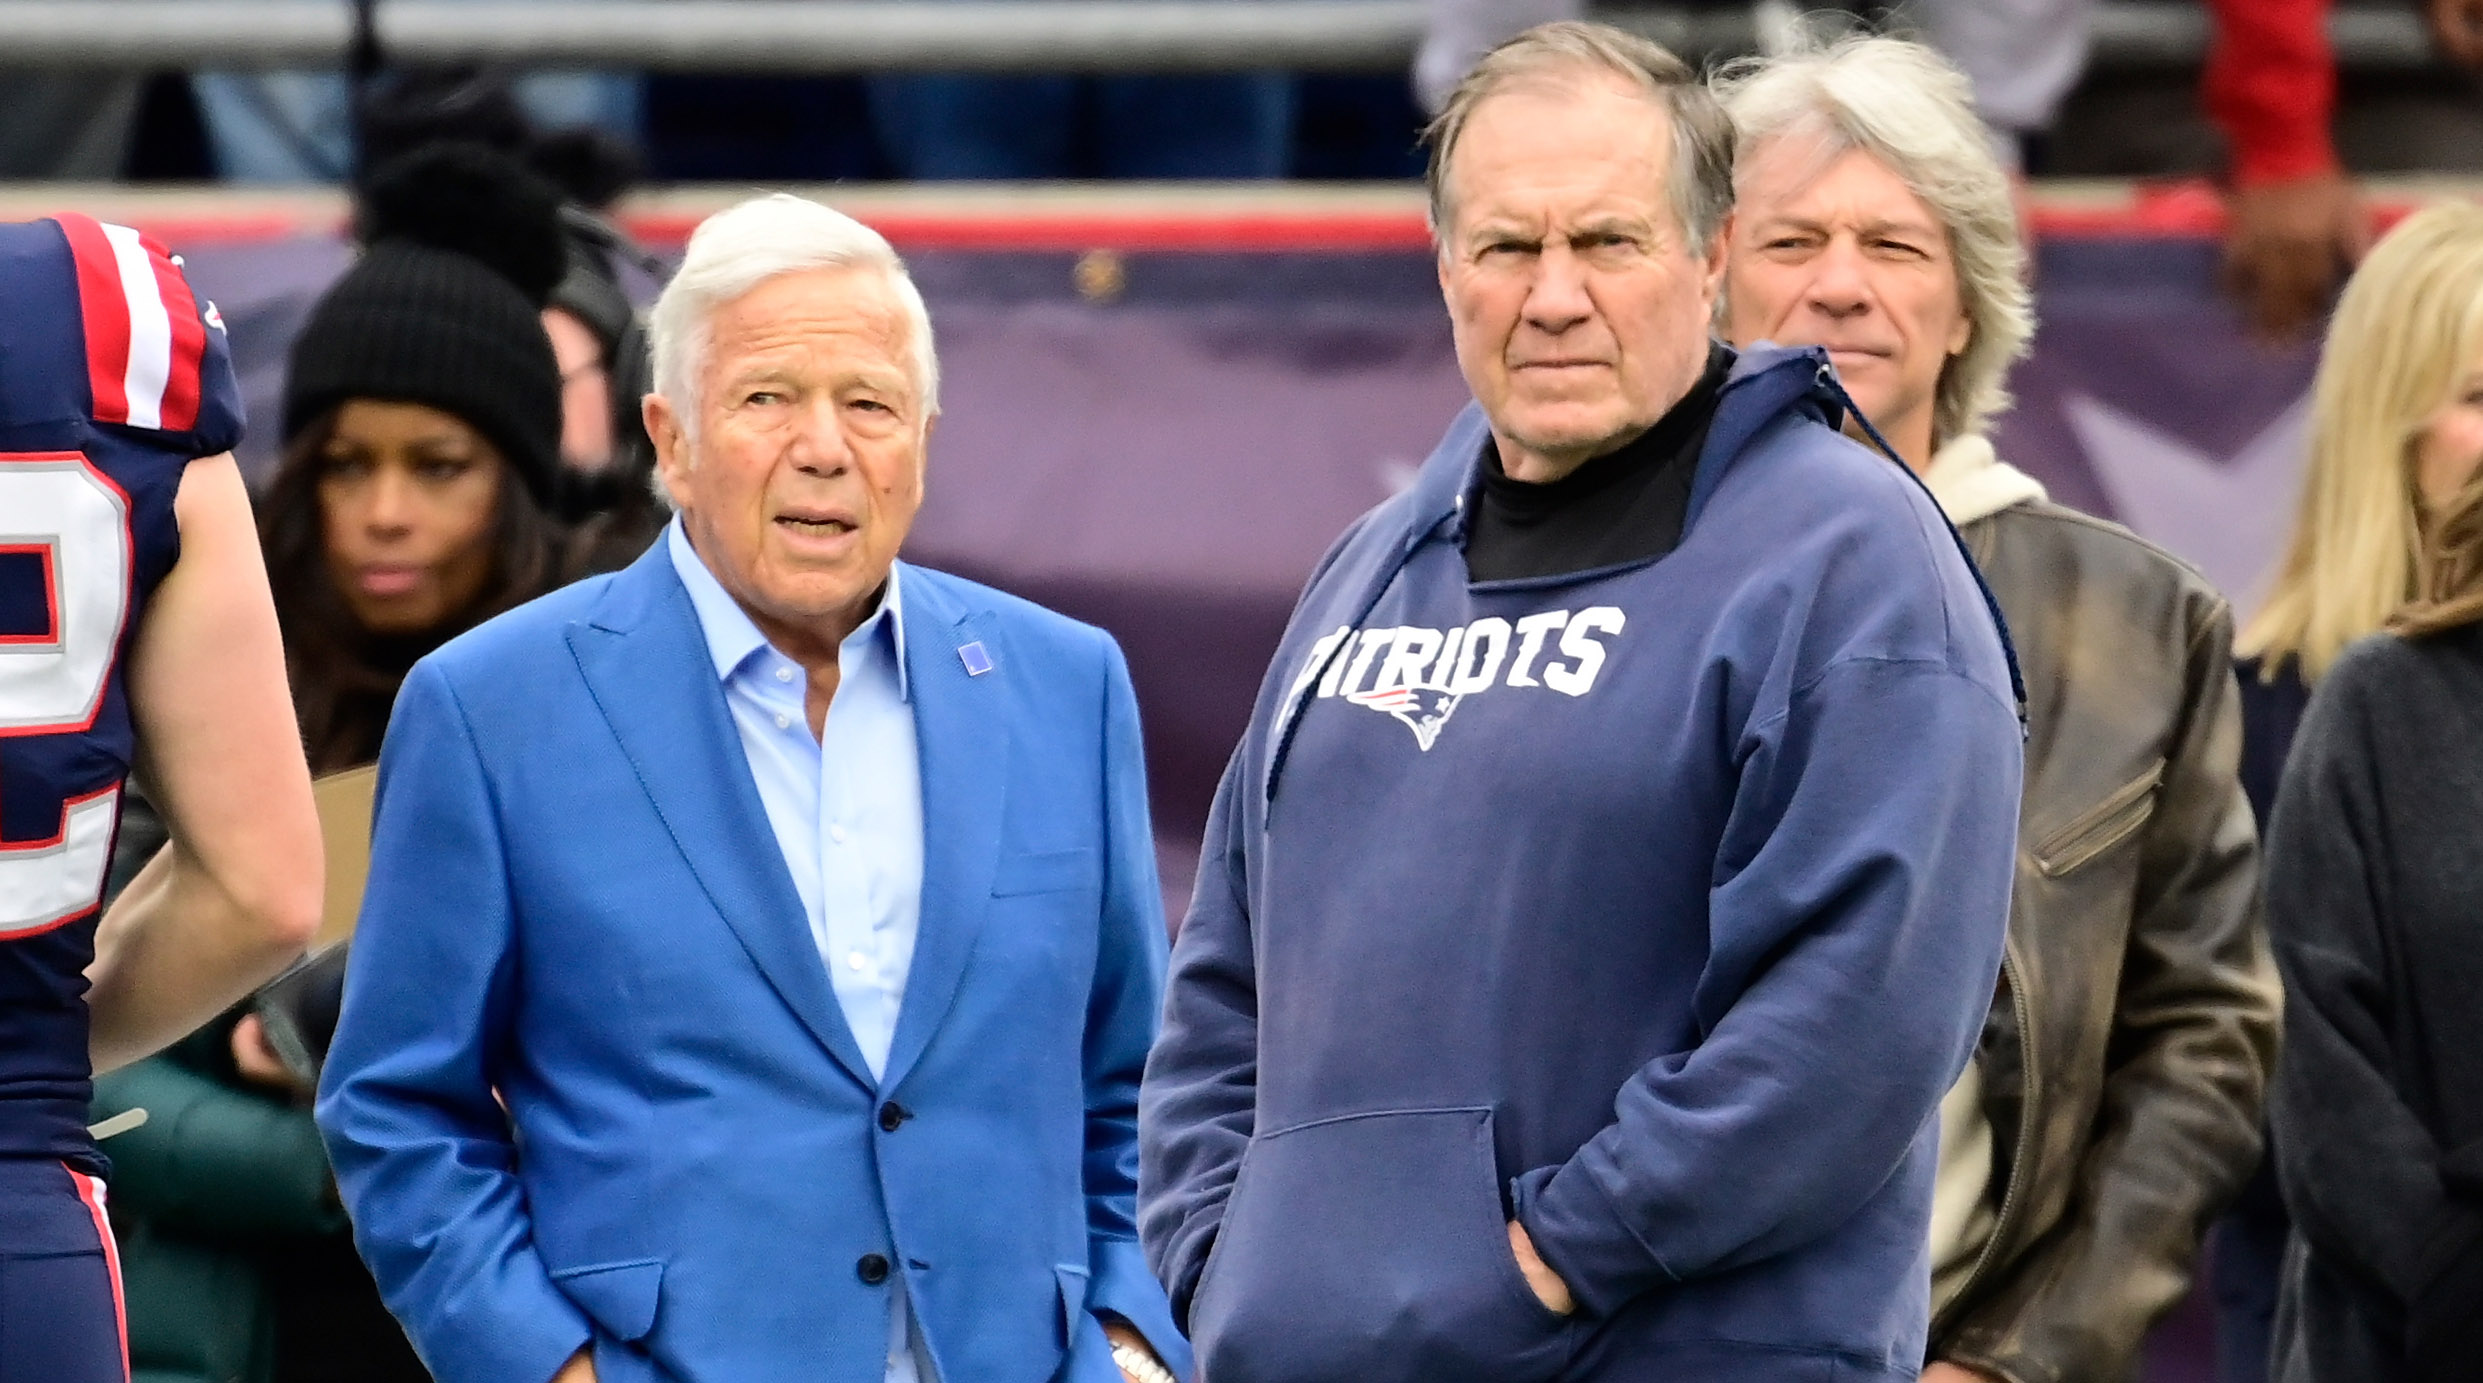 End of an Era: Bill Belichick’s Legendary Tenure with the New England Patriots